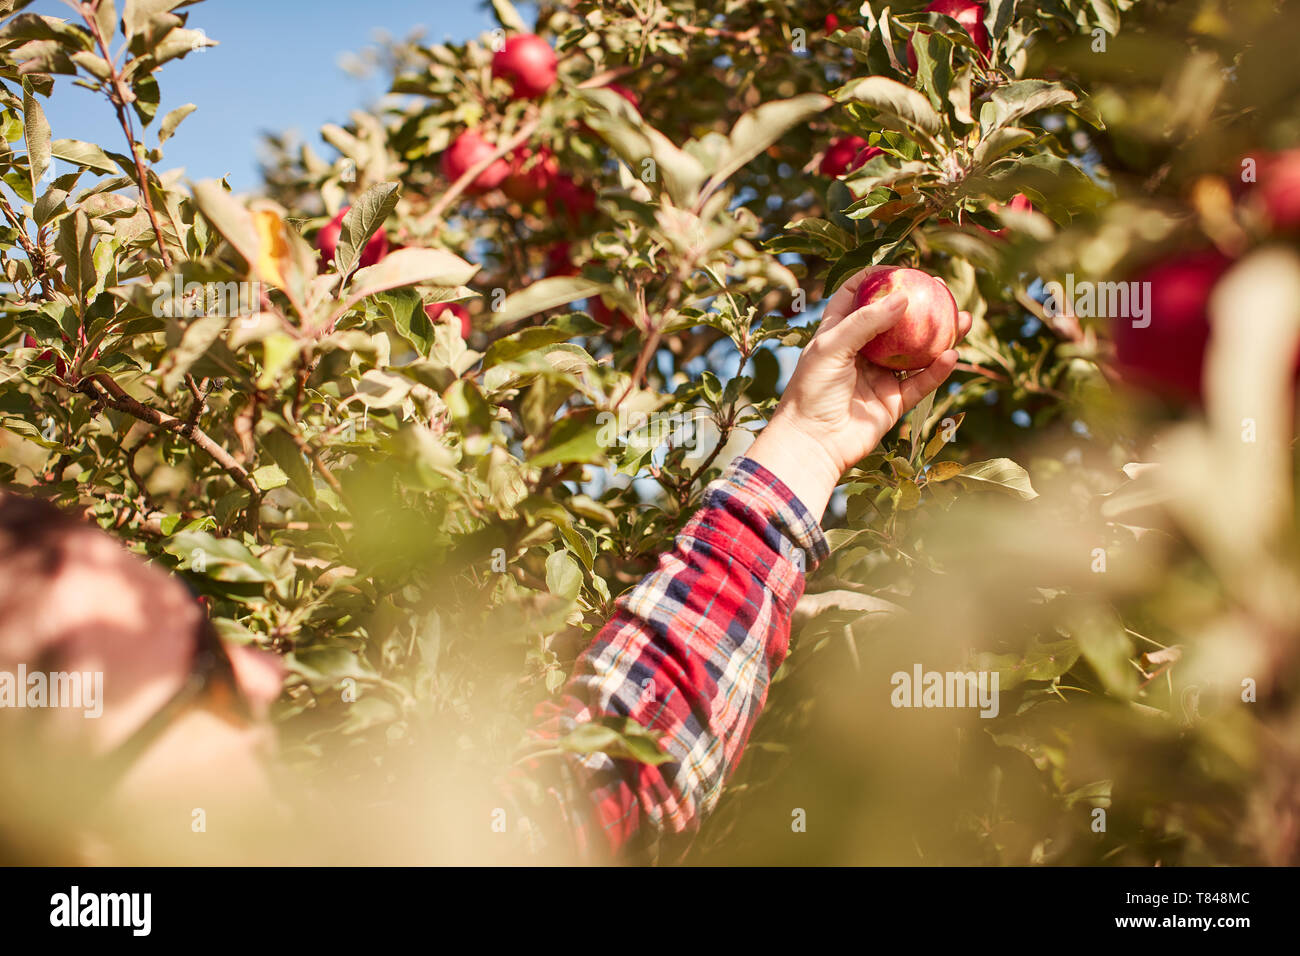 Woman picking apples from tree Banque D'Images